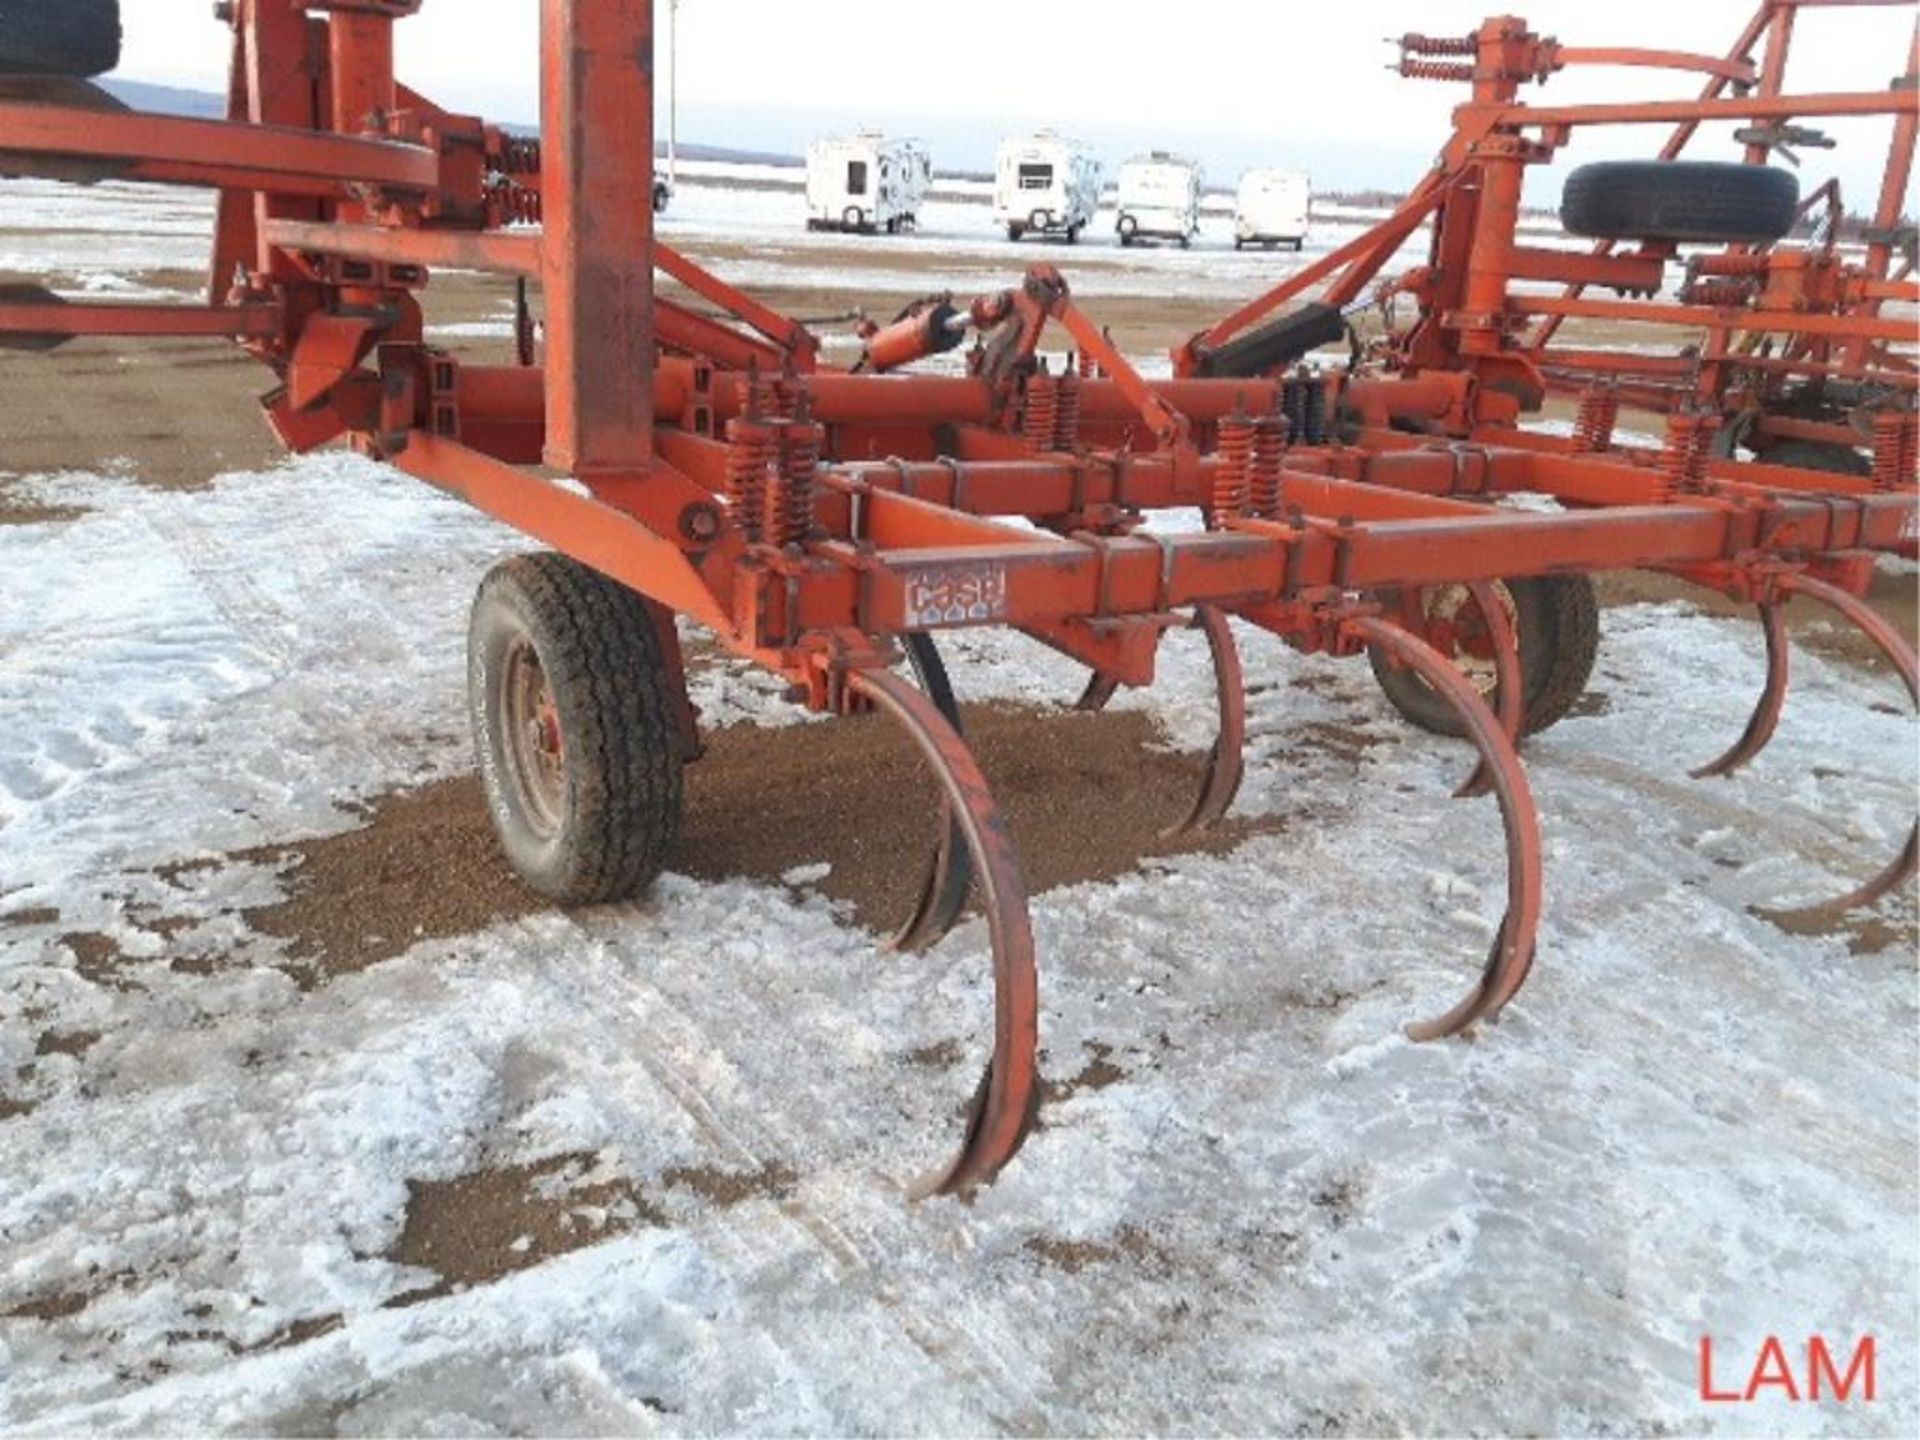 20ft Case Deep Tillage Cultivator c/w Hyd Lift Cyl - Image 2 of 5